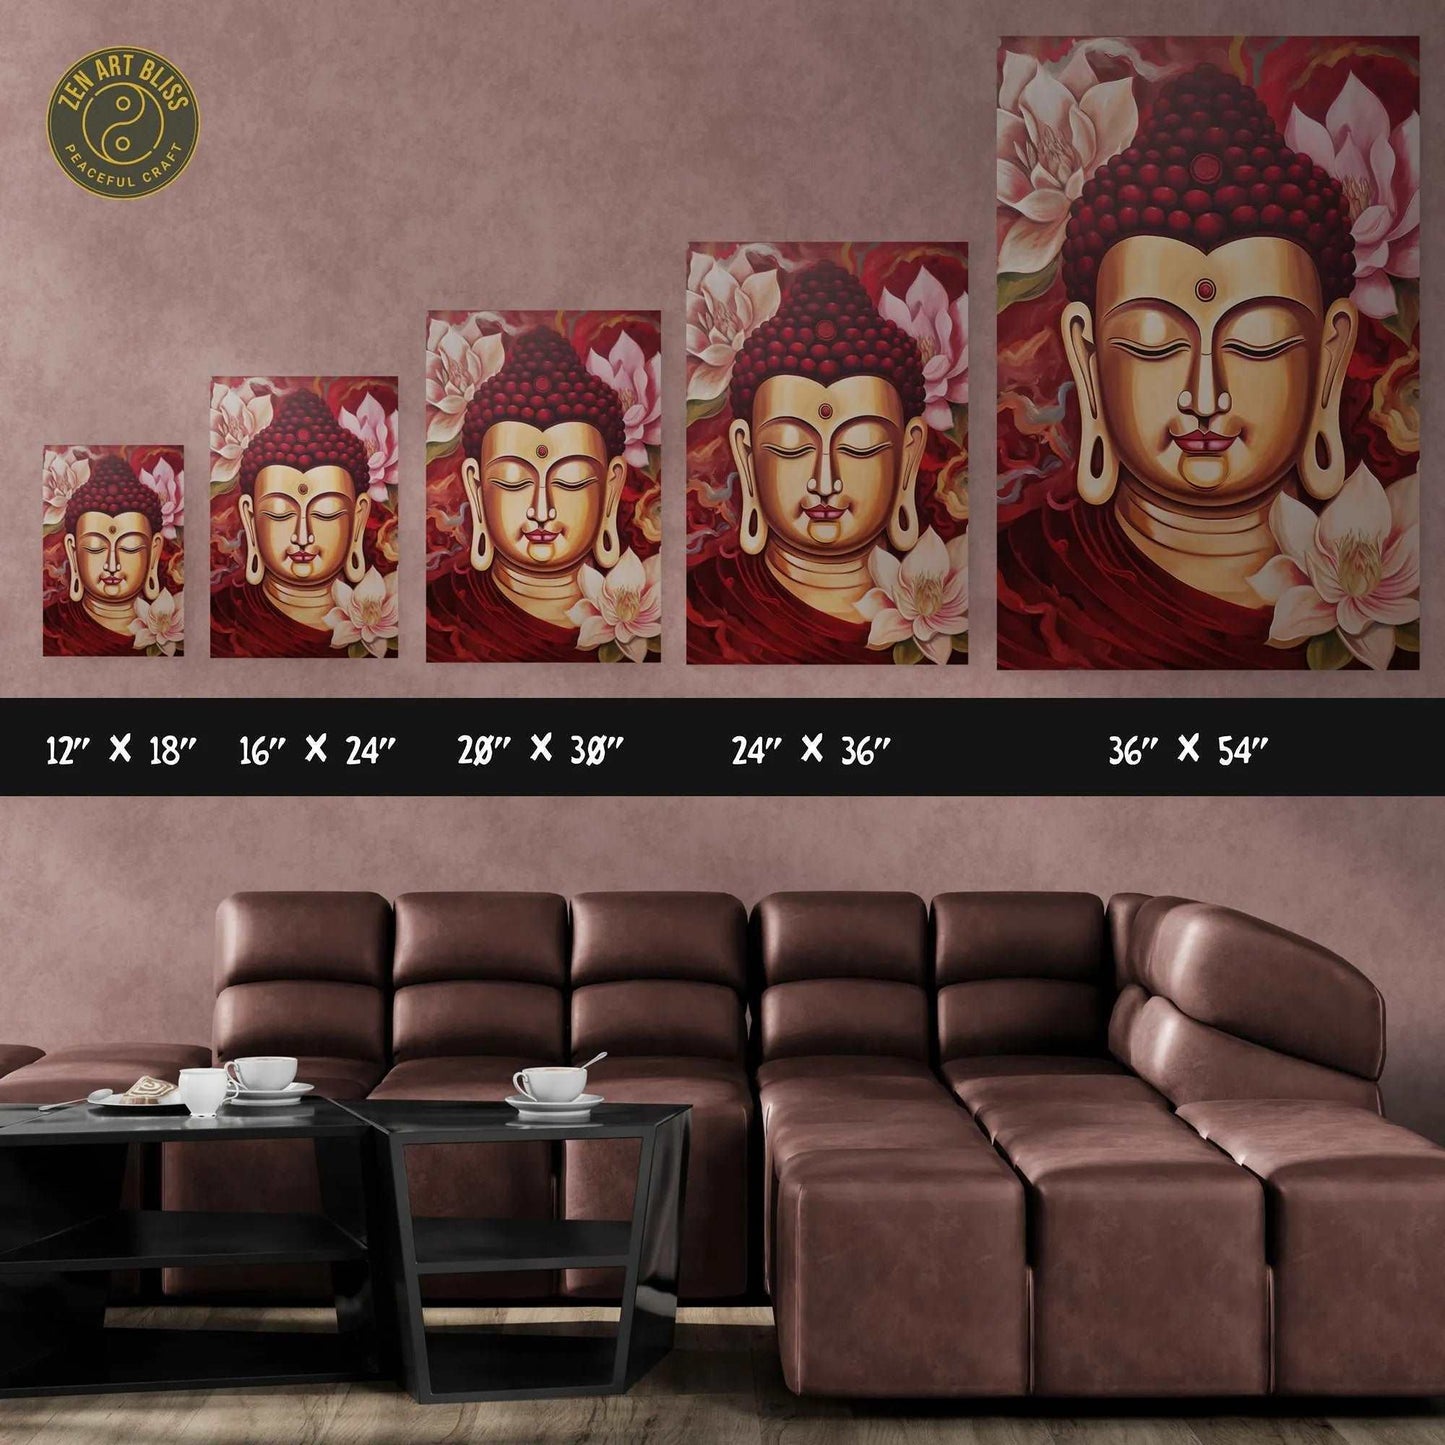 Asia Inspired Wall Art featuring a Colourful Buddha Artwork in a meditative pose with a rainbow of colors on matte finish paper, encapsulating cultural artistry.